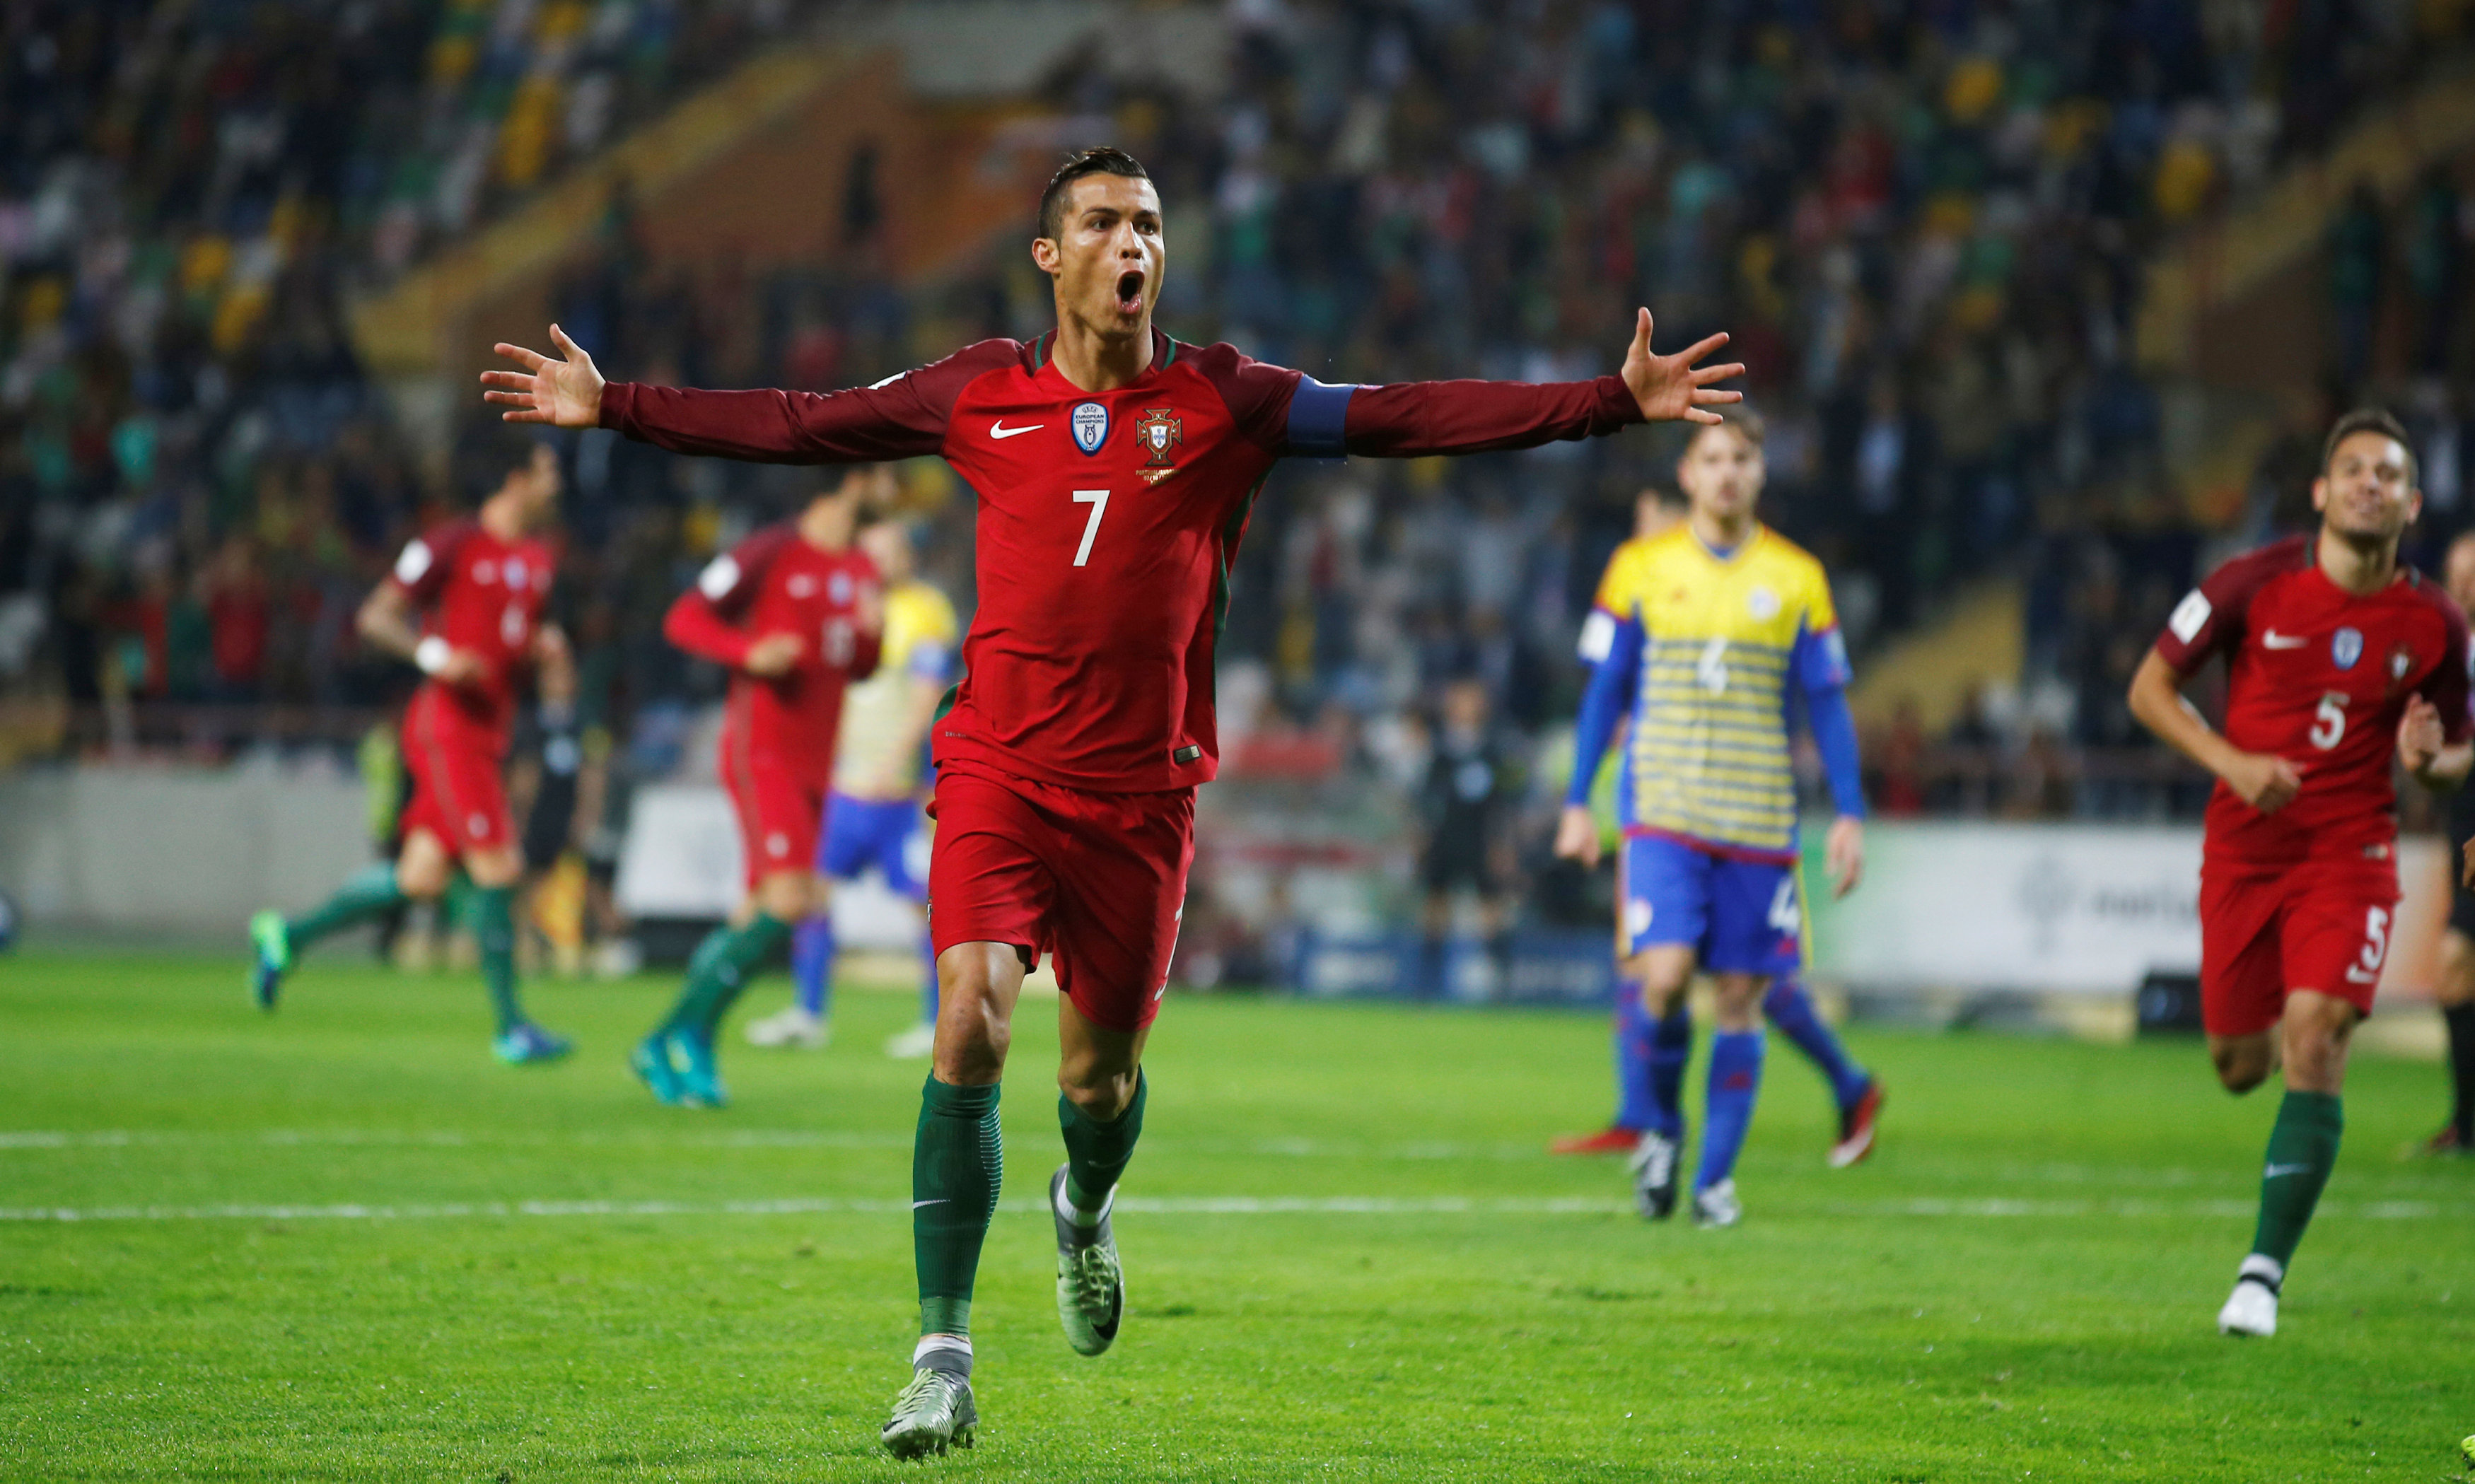 Portugal's Cristiano Ronaldo celebrates his second goal against Andorra during the World Cup 2018 qualifiers at the Aveiro stadium, Aveiro, Portugal on October 7, 2016. Photo: Reuters